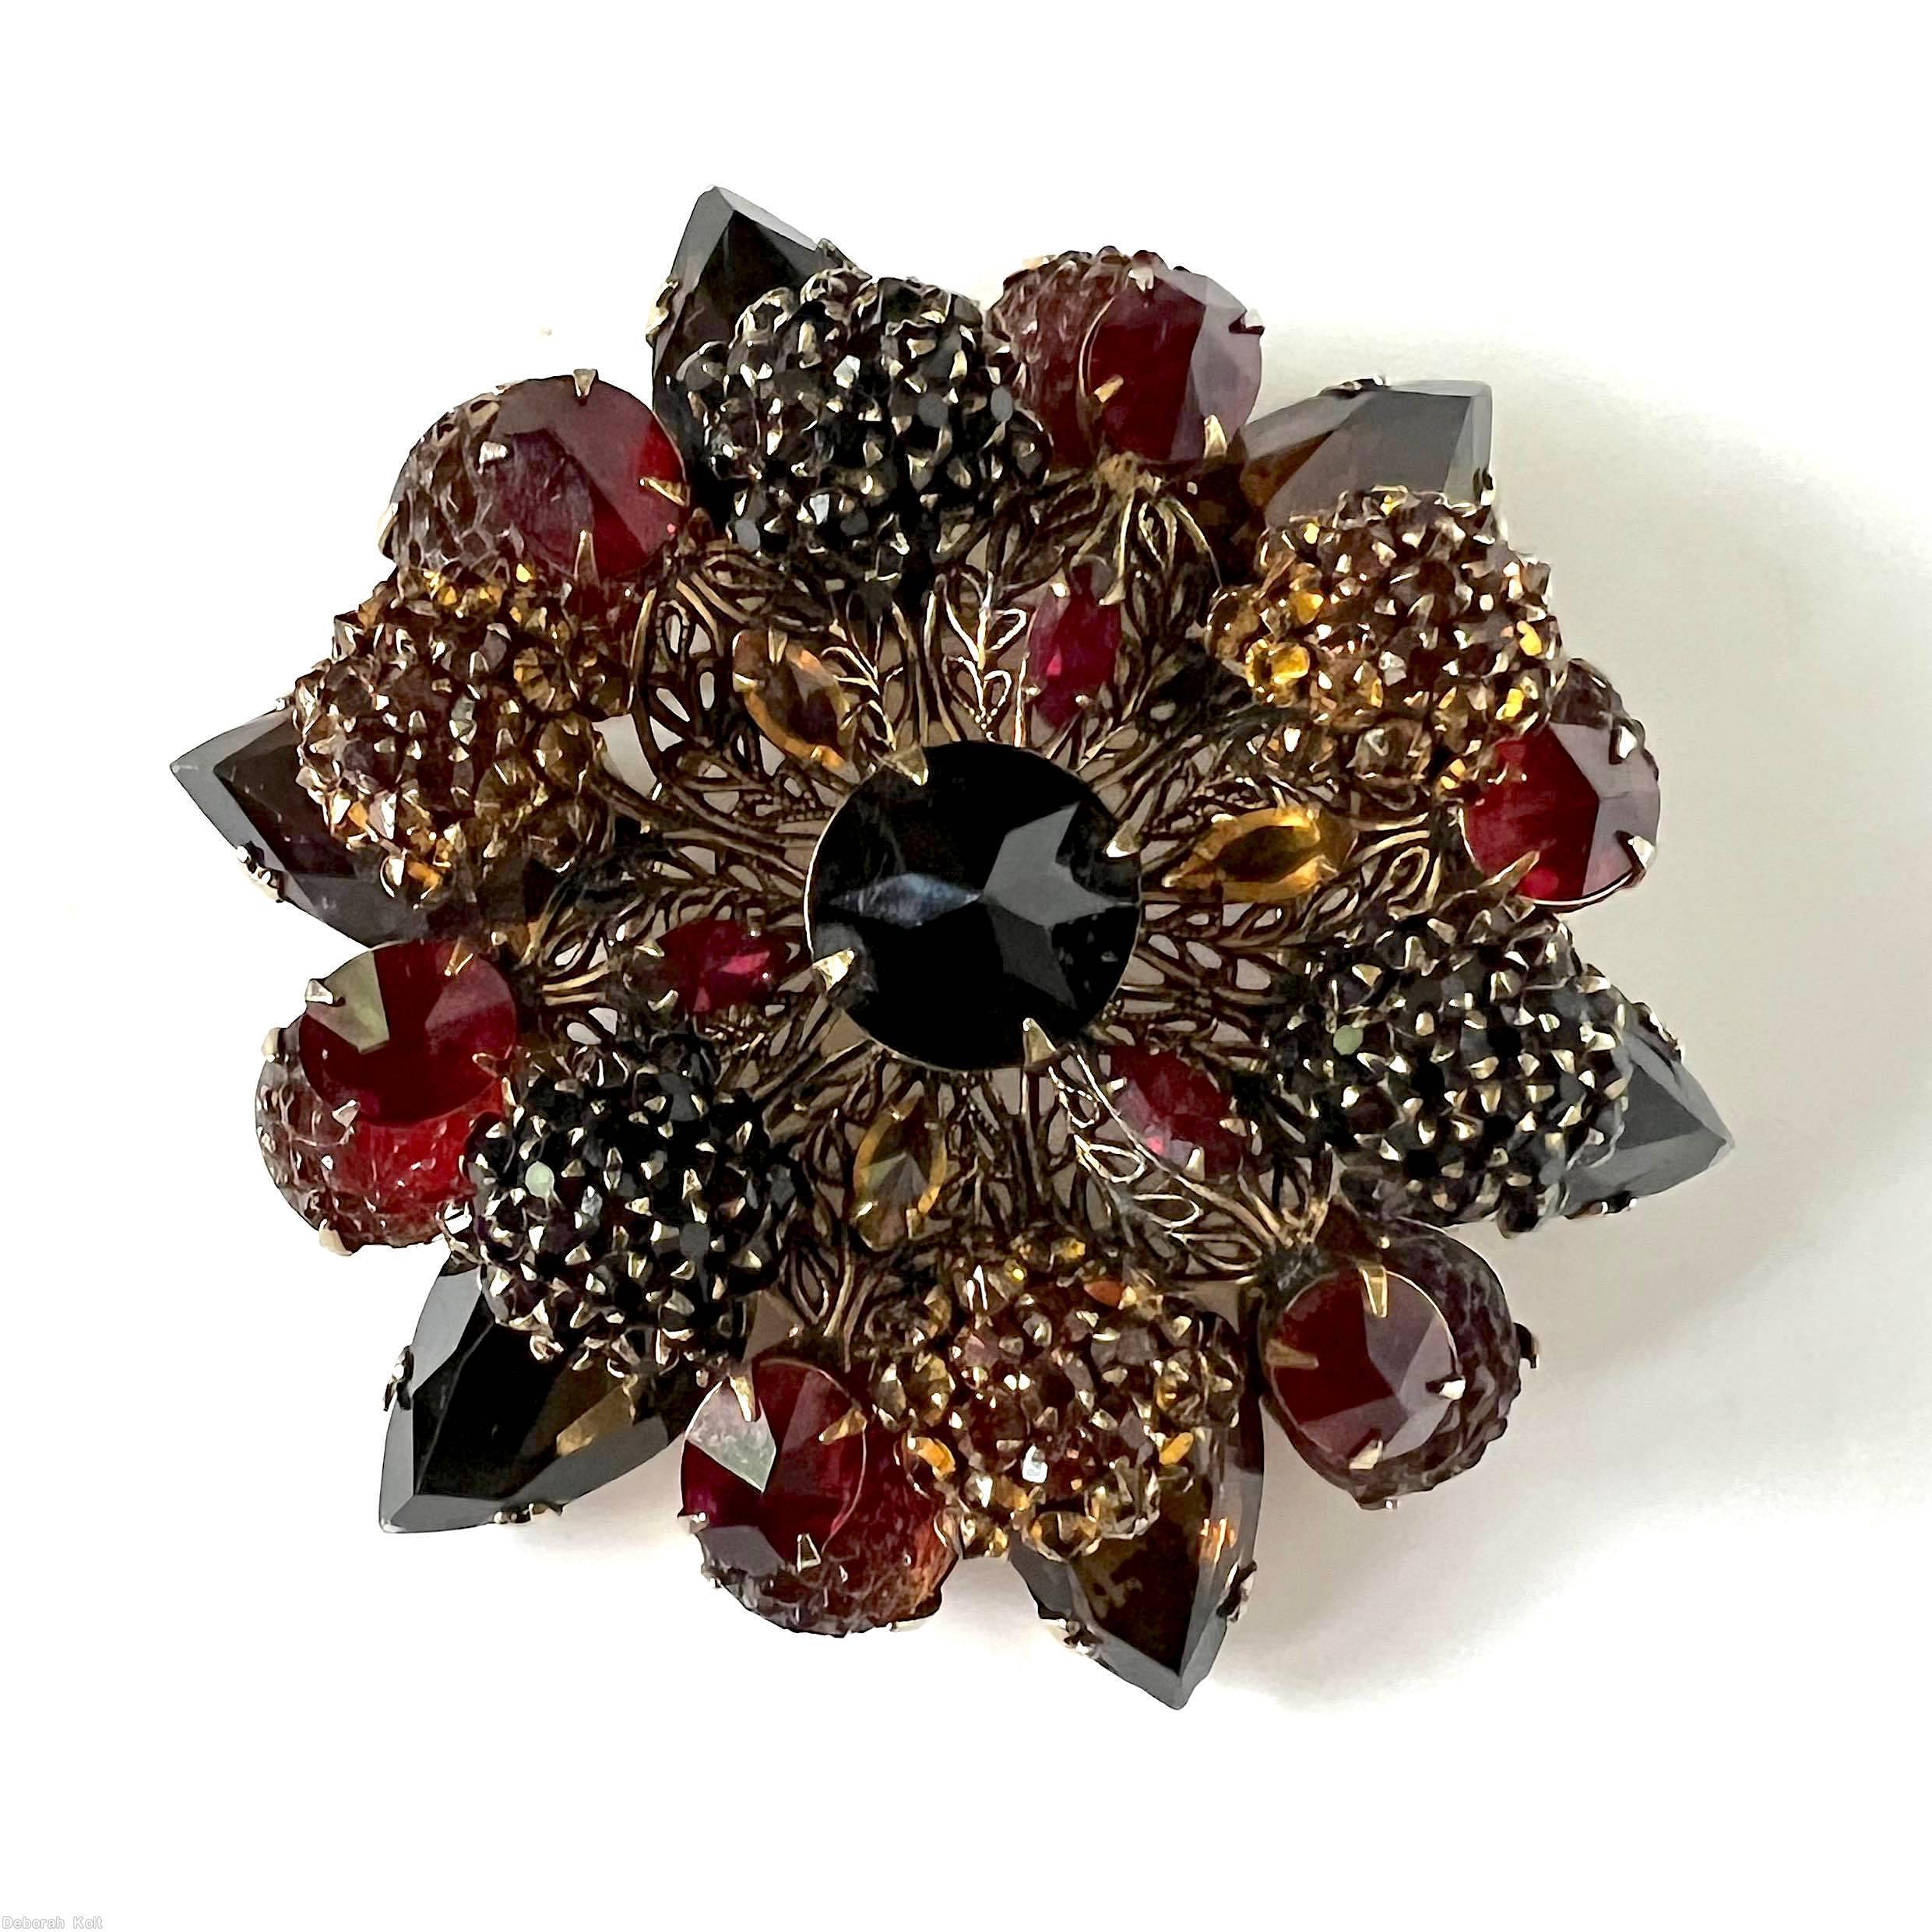 Schreiner 6 clustered ball filigree 2 level radial pin 6 large teardrop large round stone center jet faceted round large center stone jet clustered ball of small chaton topaz ball of small chaton ruby cracked ice goldtone jewelry